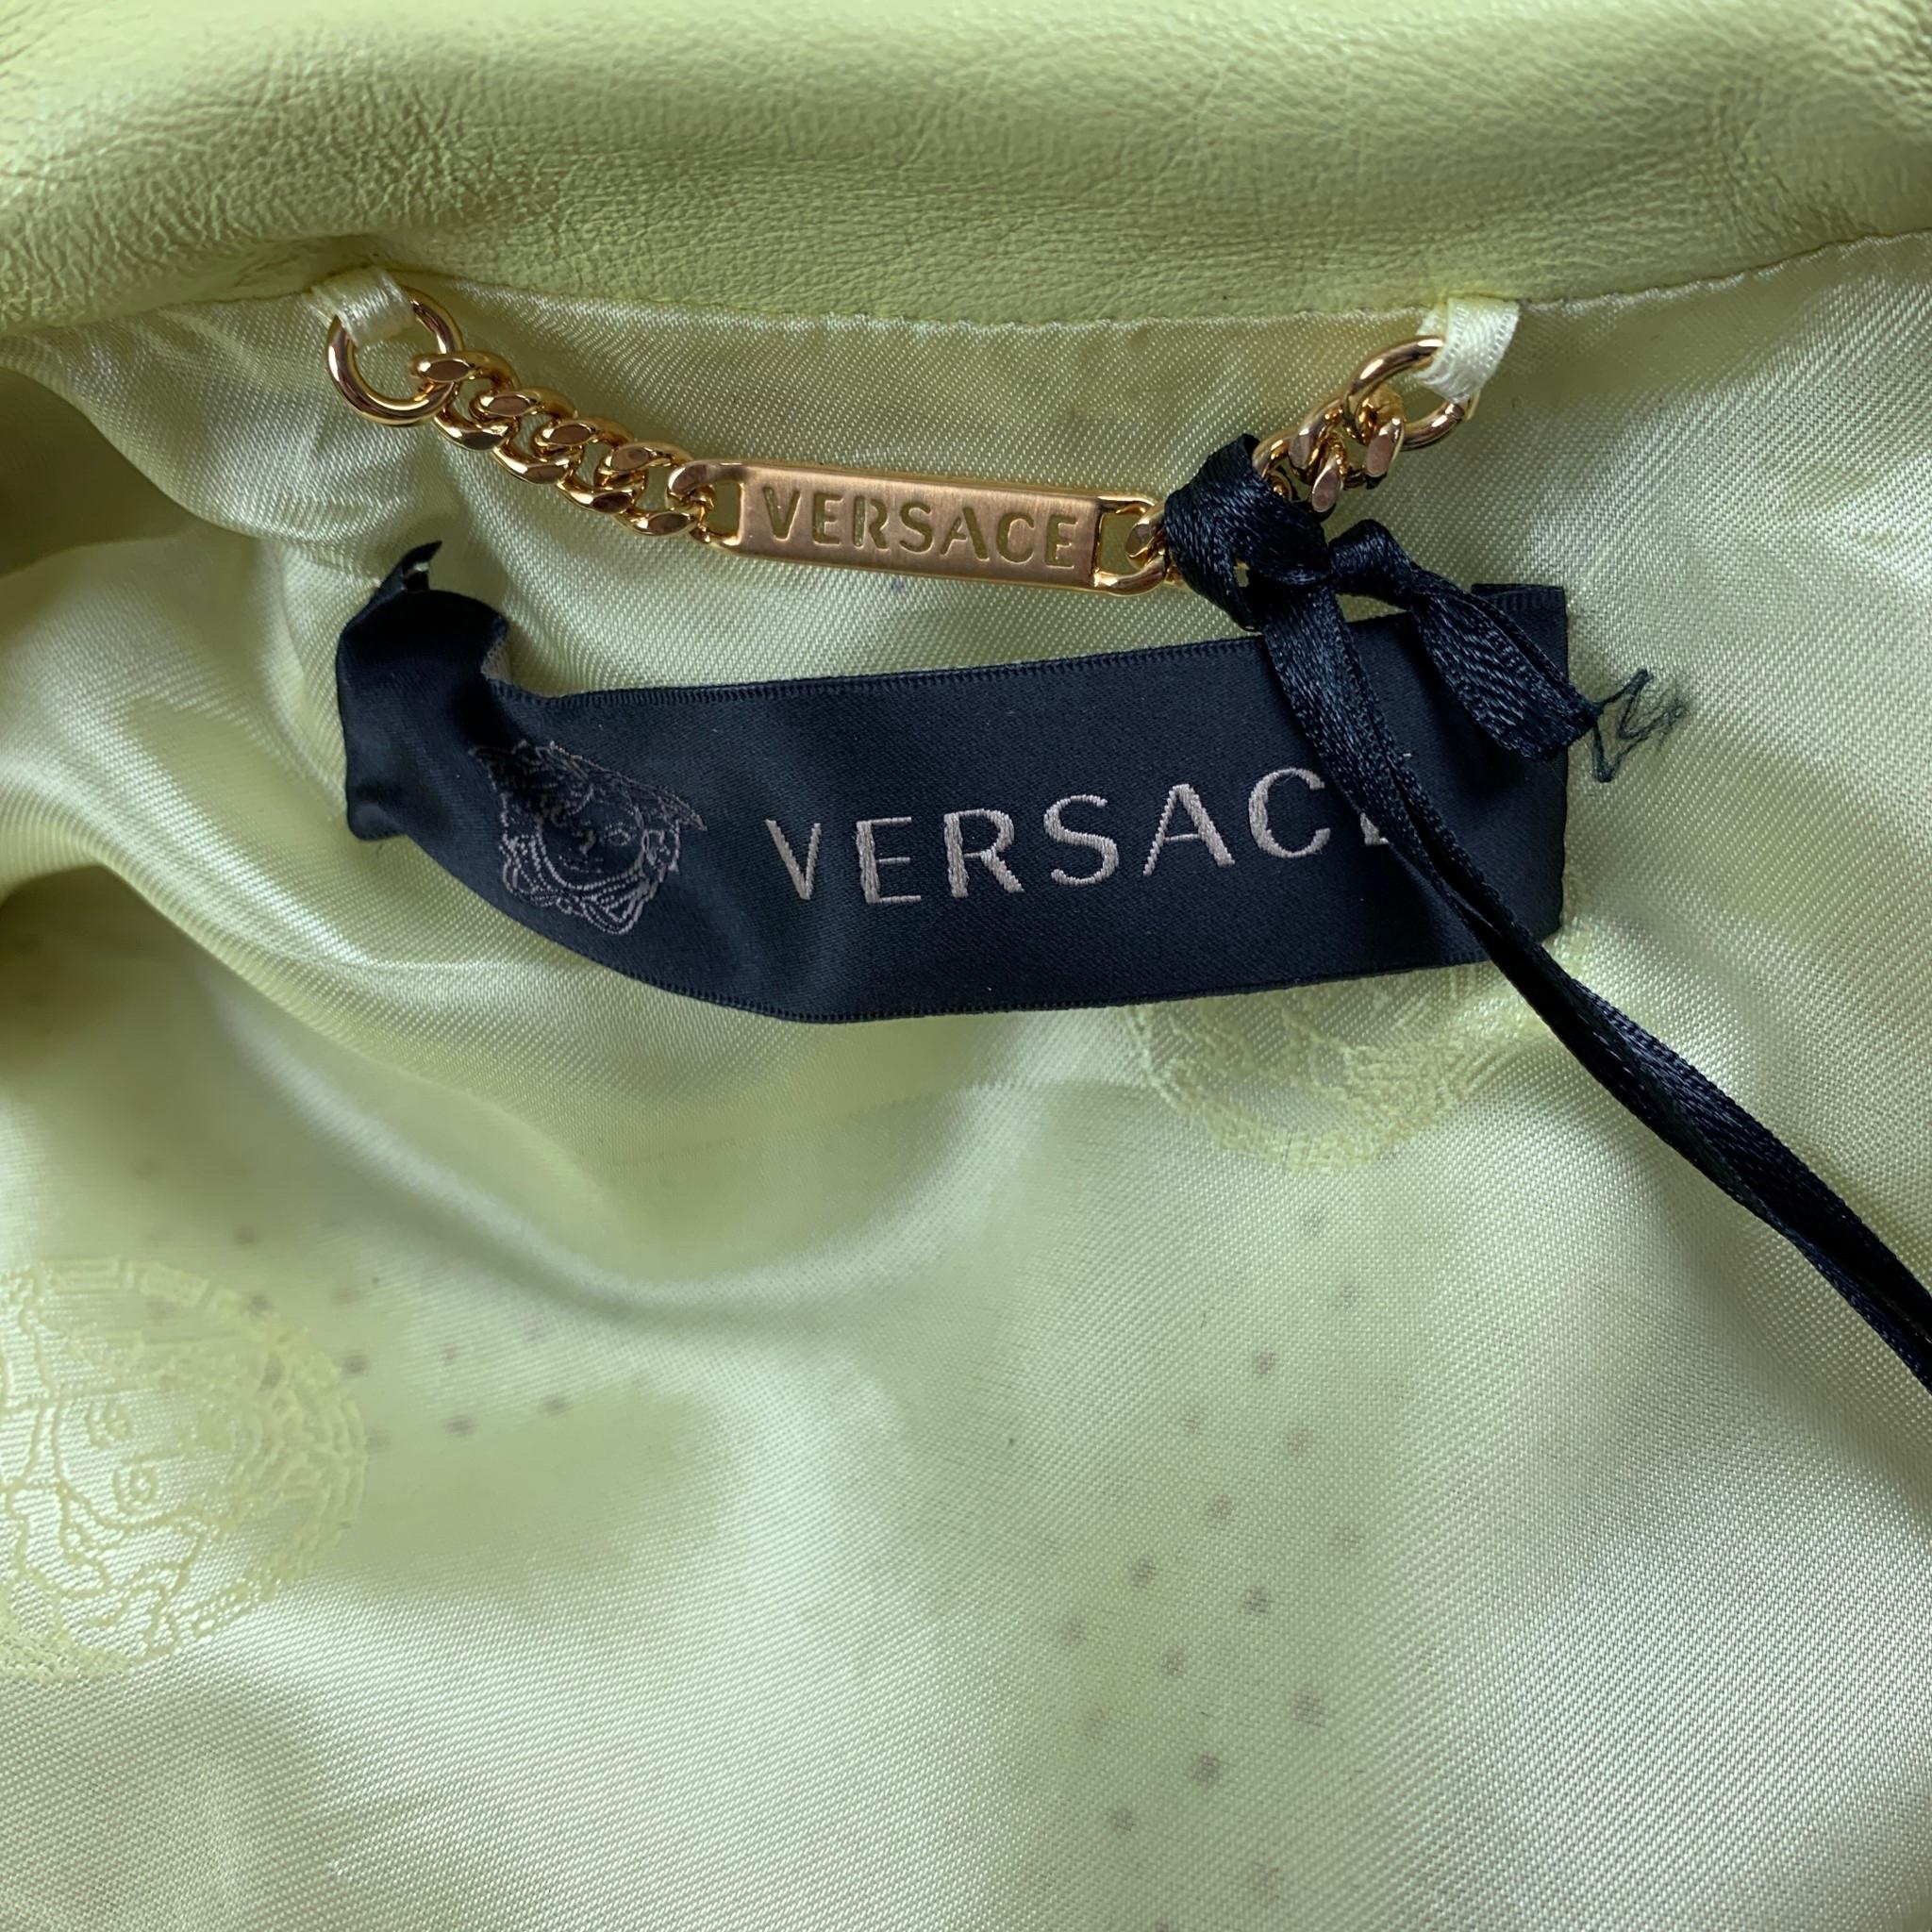 VERSACE Spring 2012 Size 2 Yellow & Gold Studded Leather Biker Jacket 5